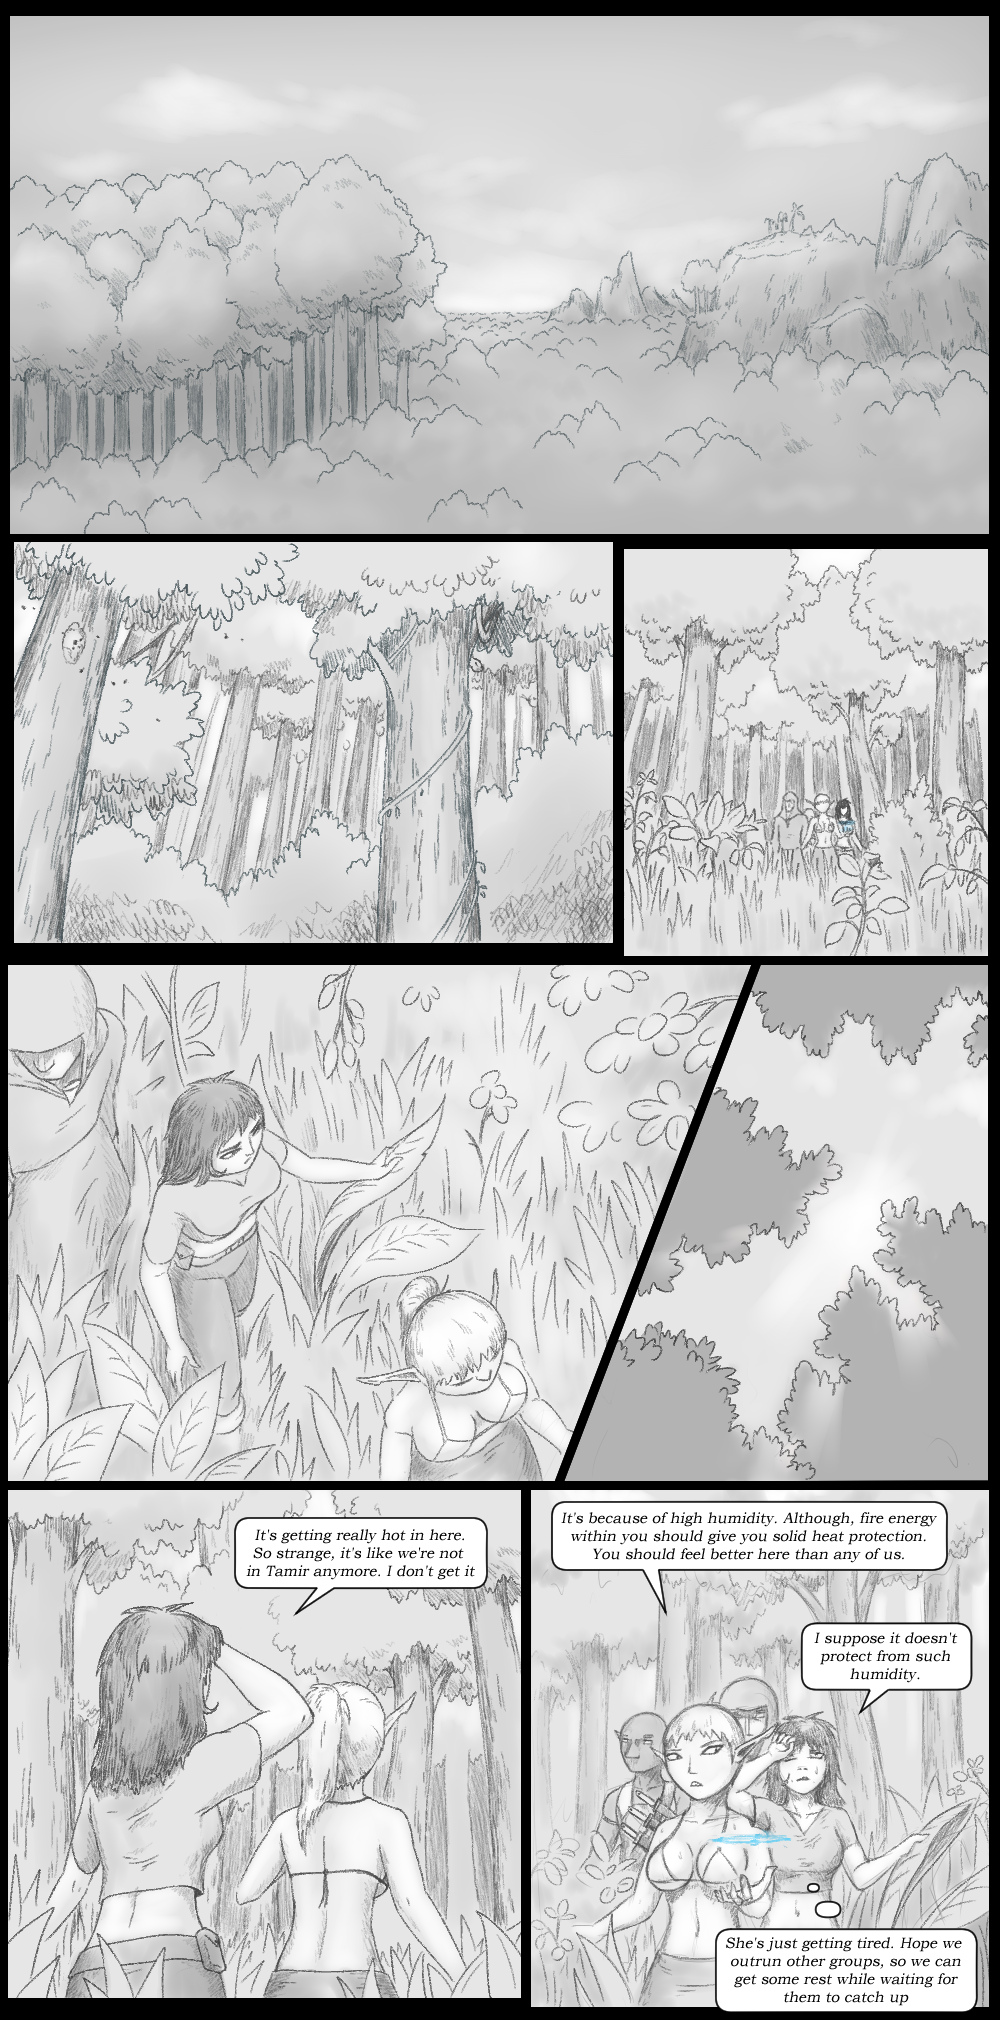 Page 10 - within Jungle